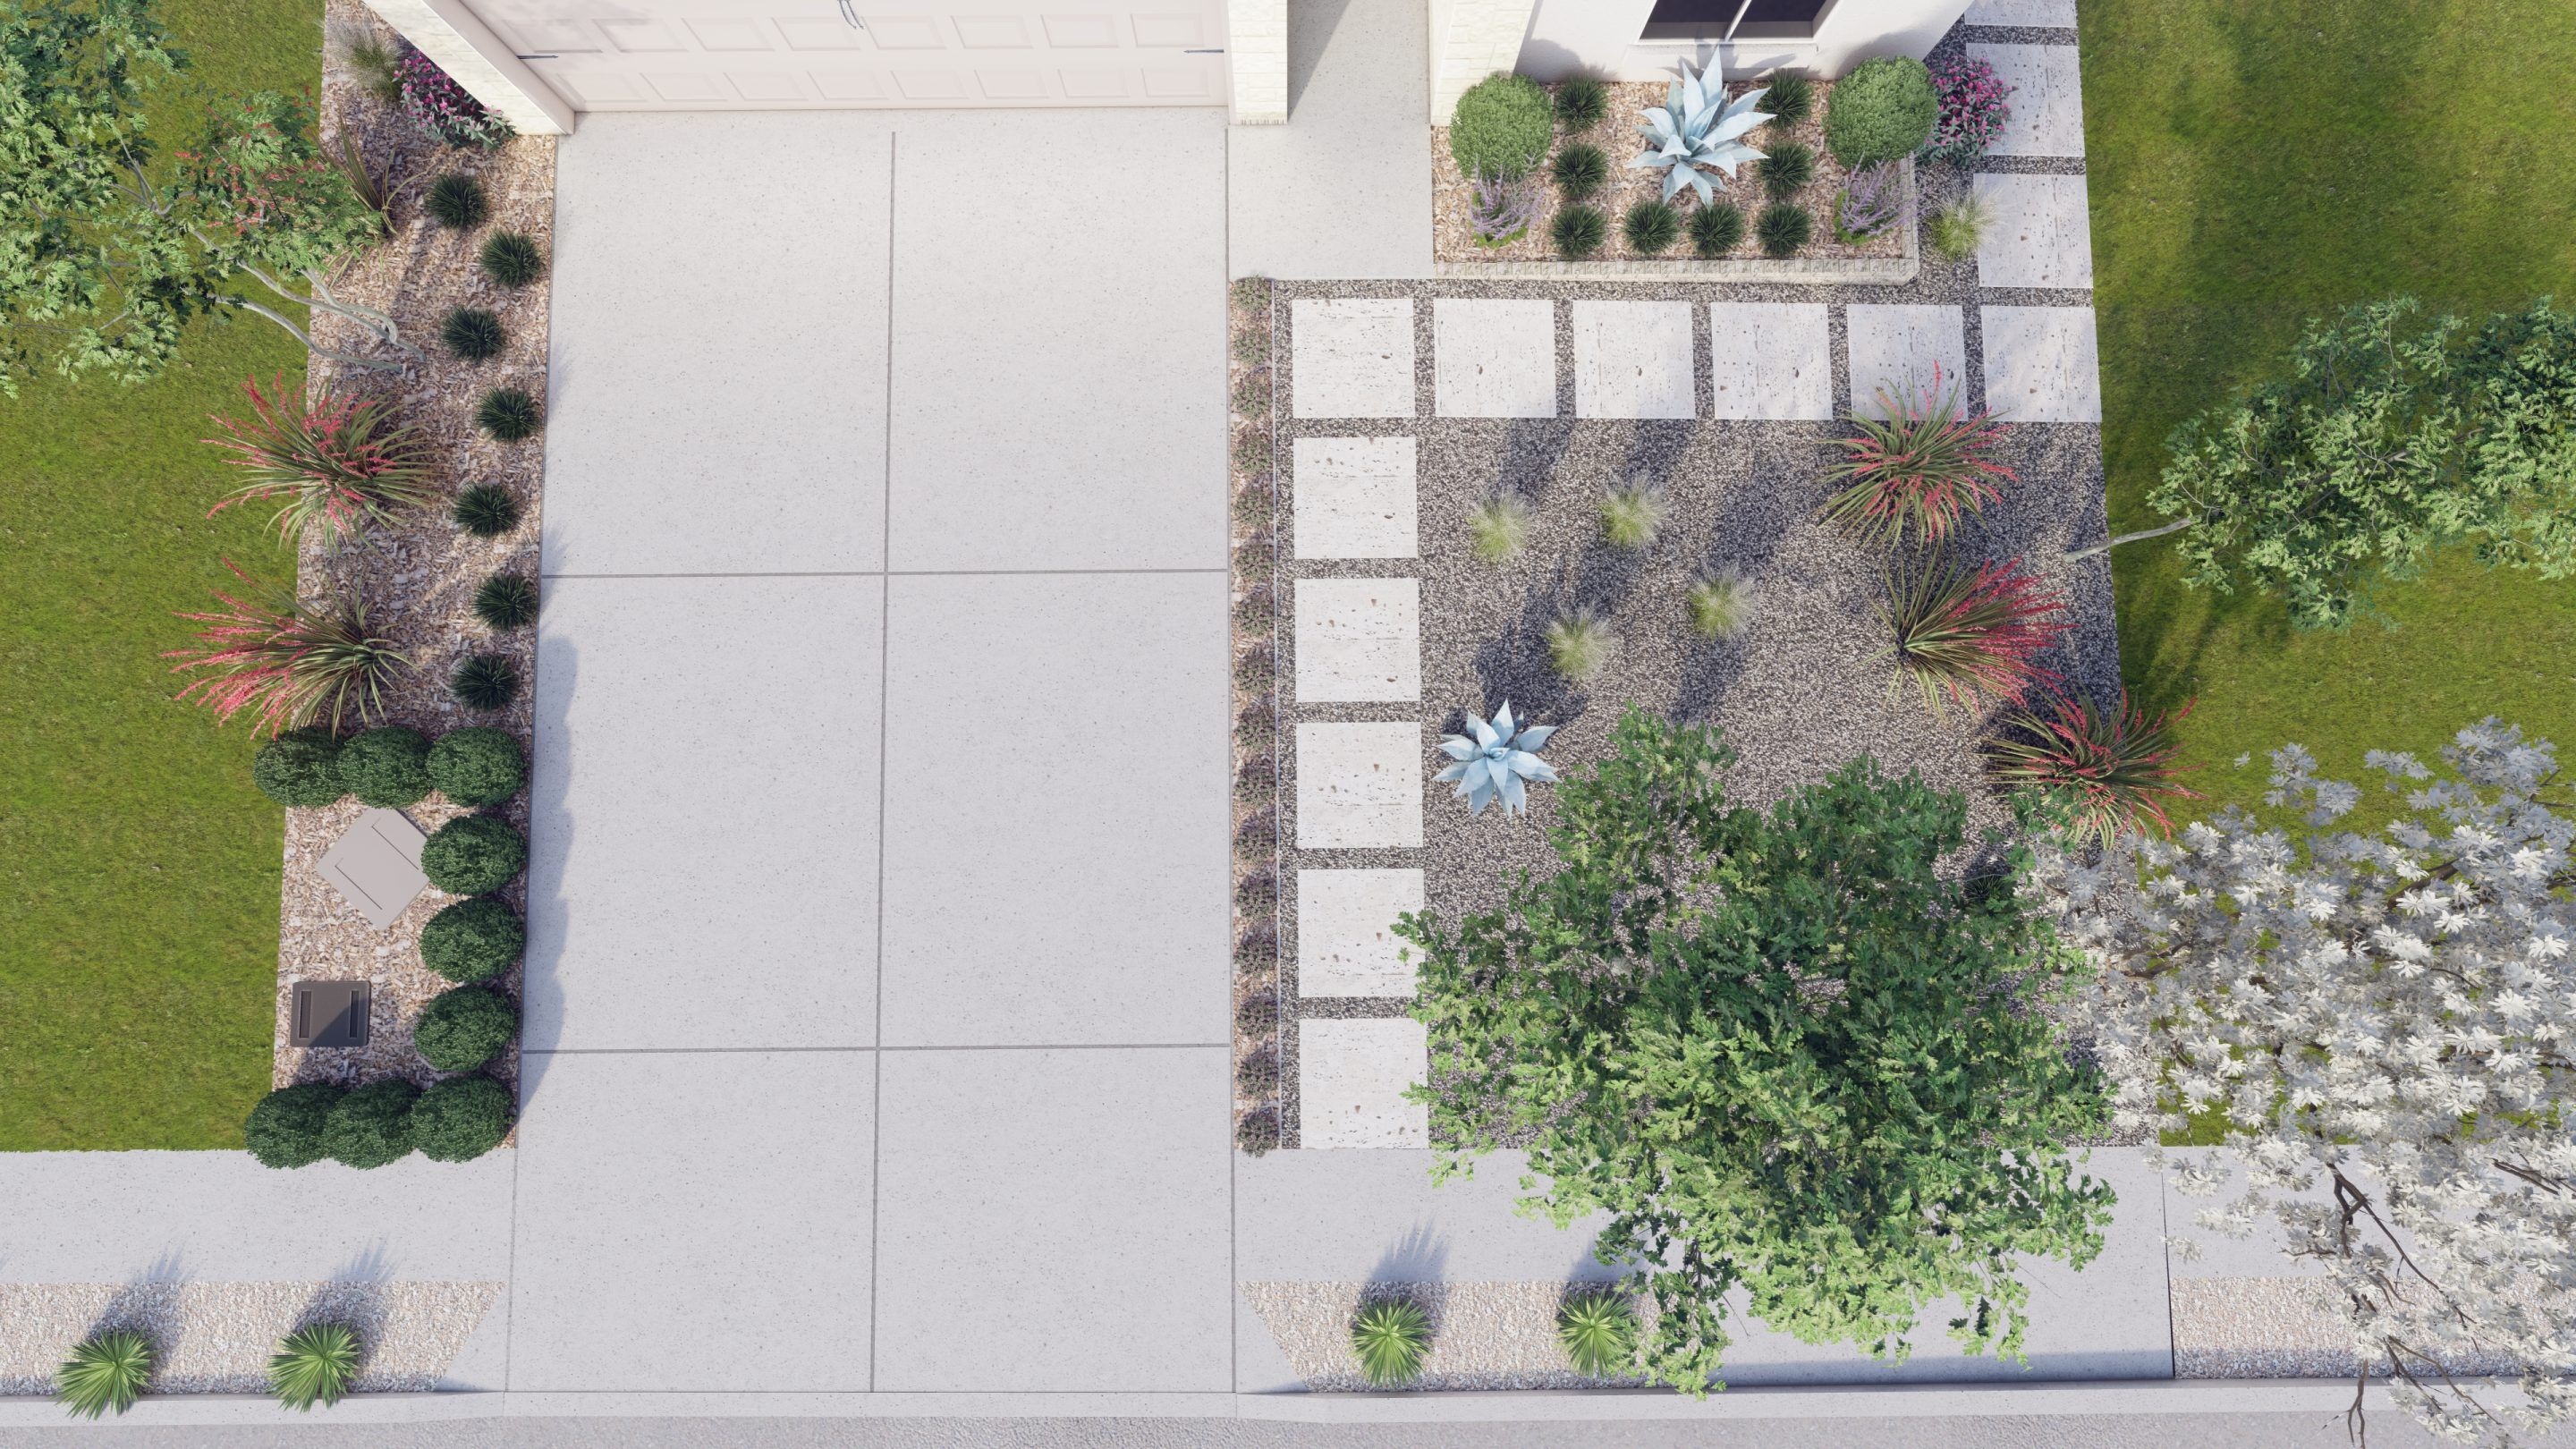 drought-tolerant-and-water-wise-landscaping-rebate-programs-tilly-design